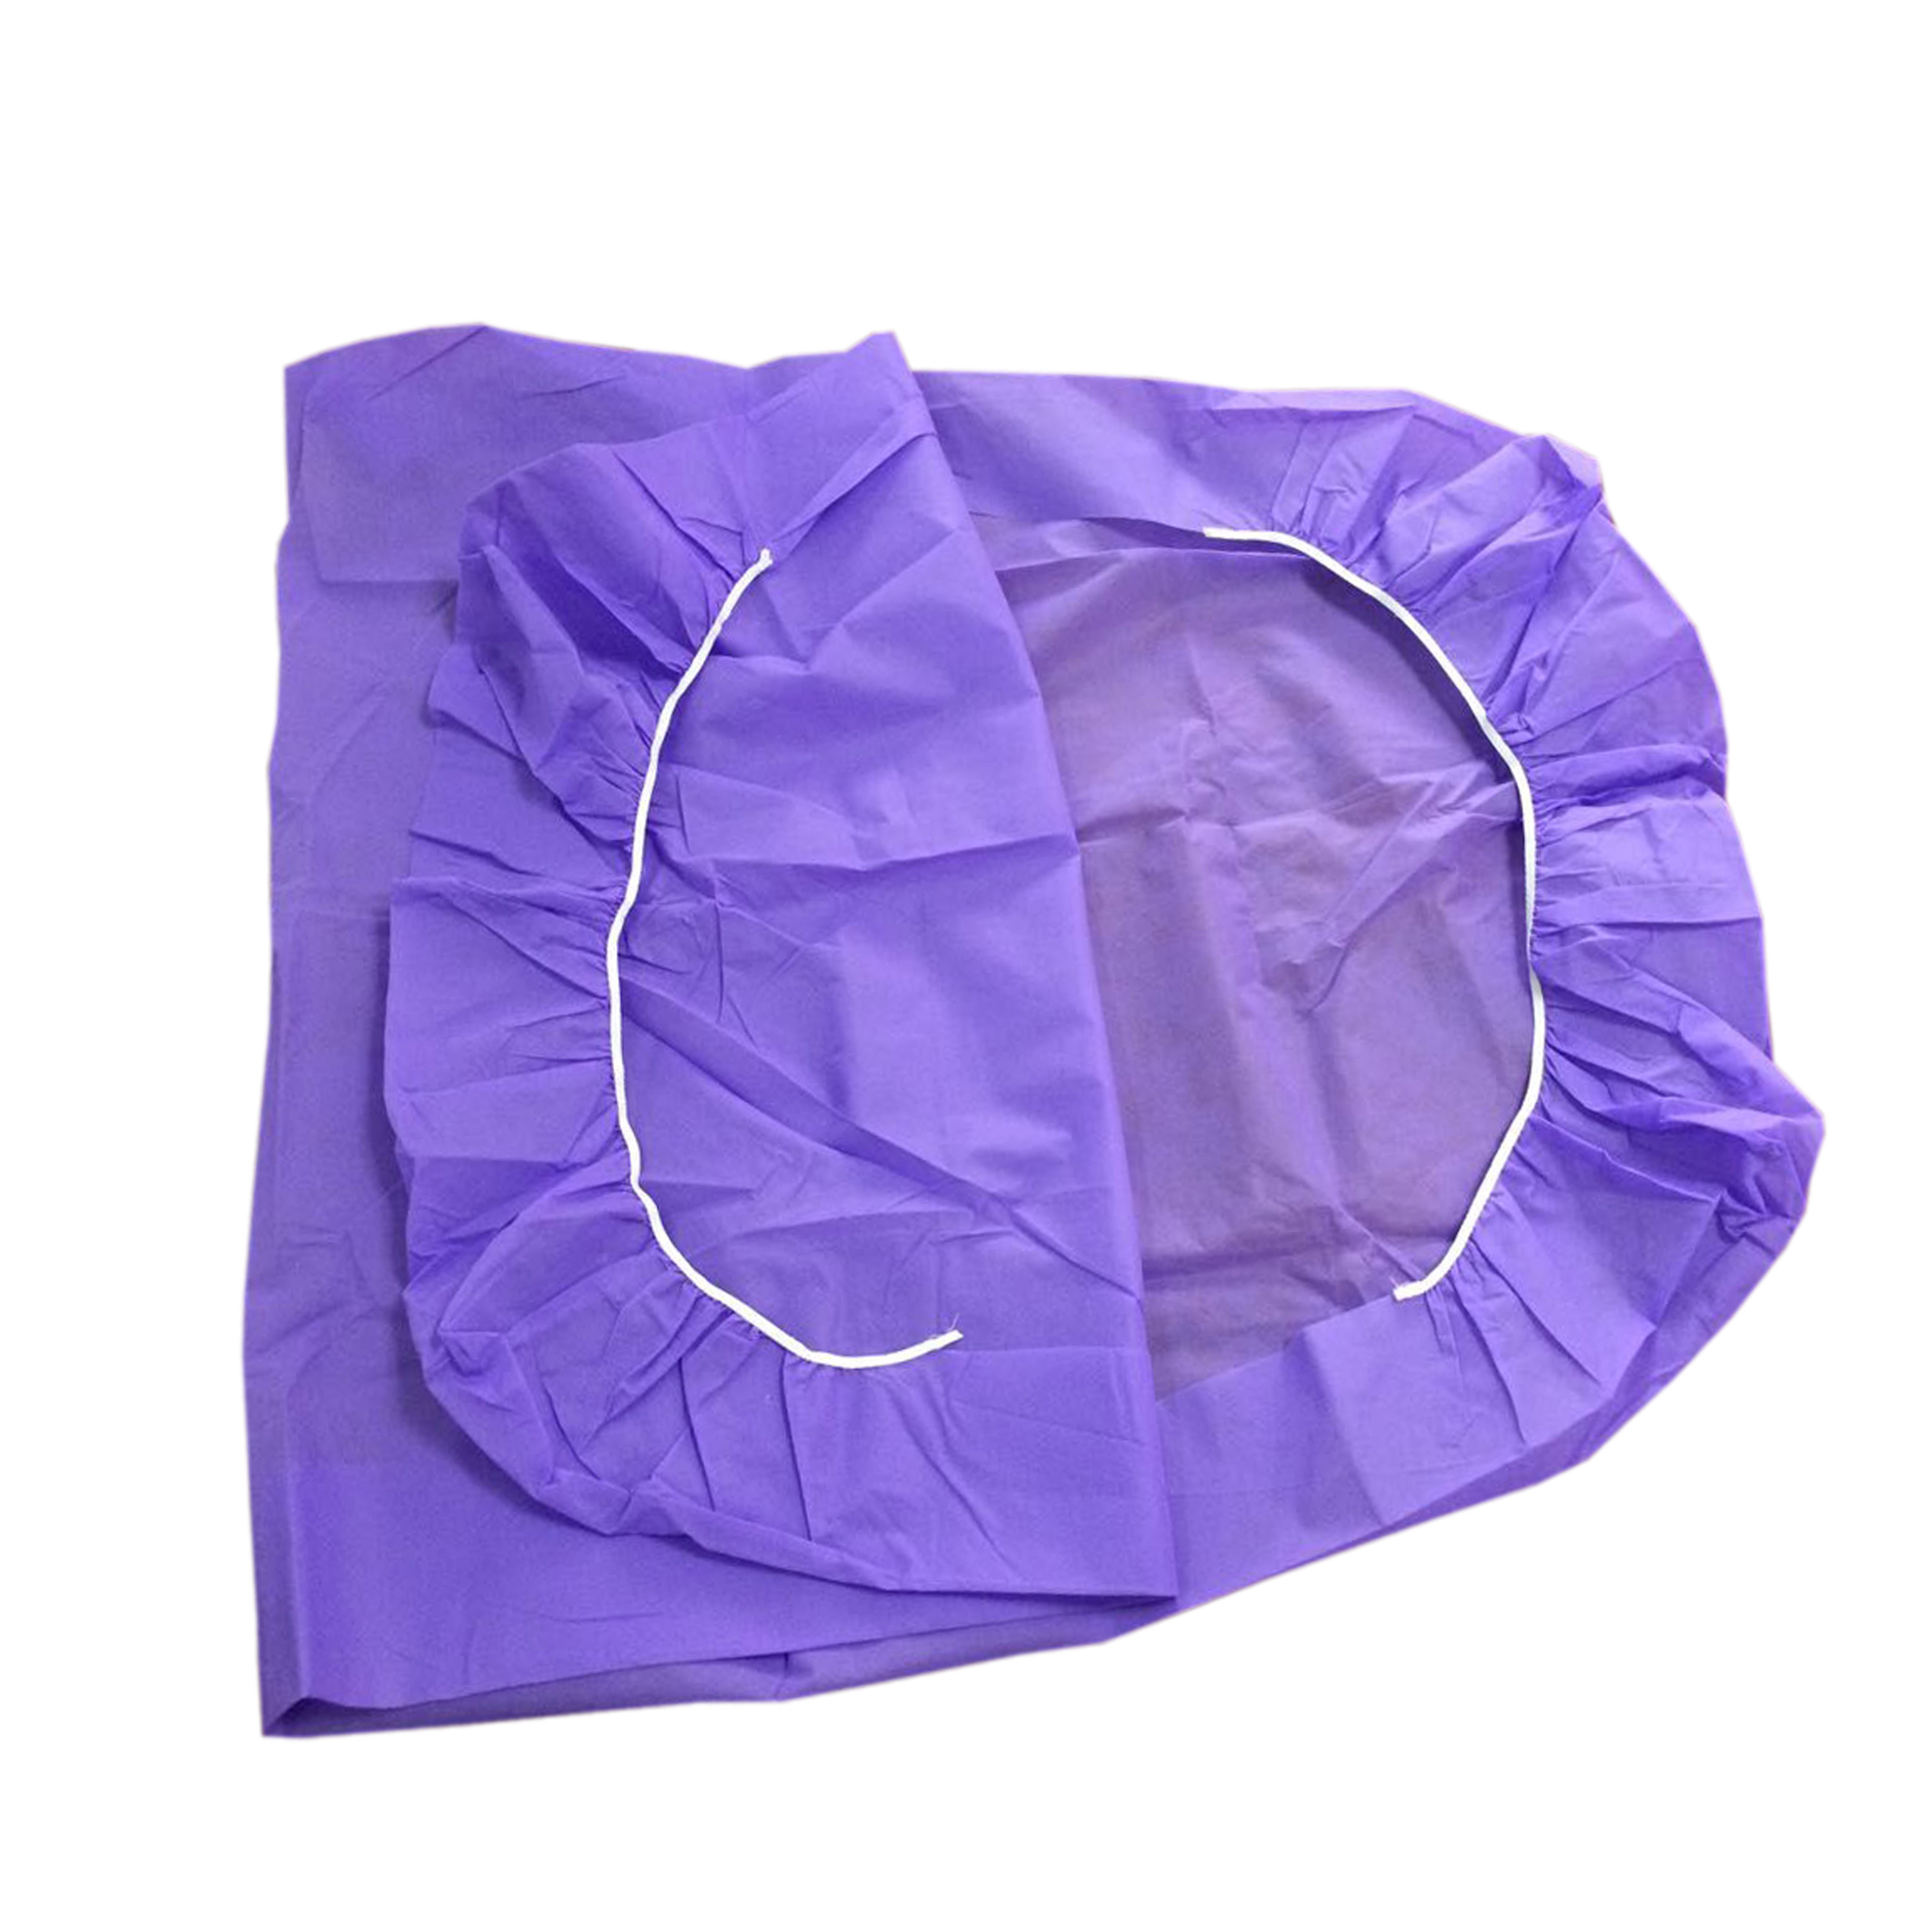 Disposable nonwoven bed sheet 